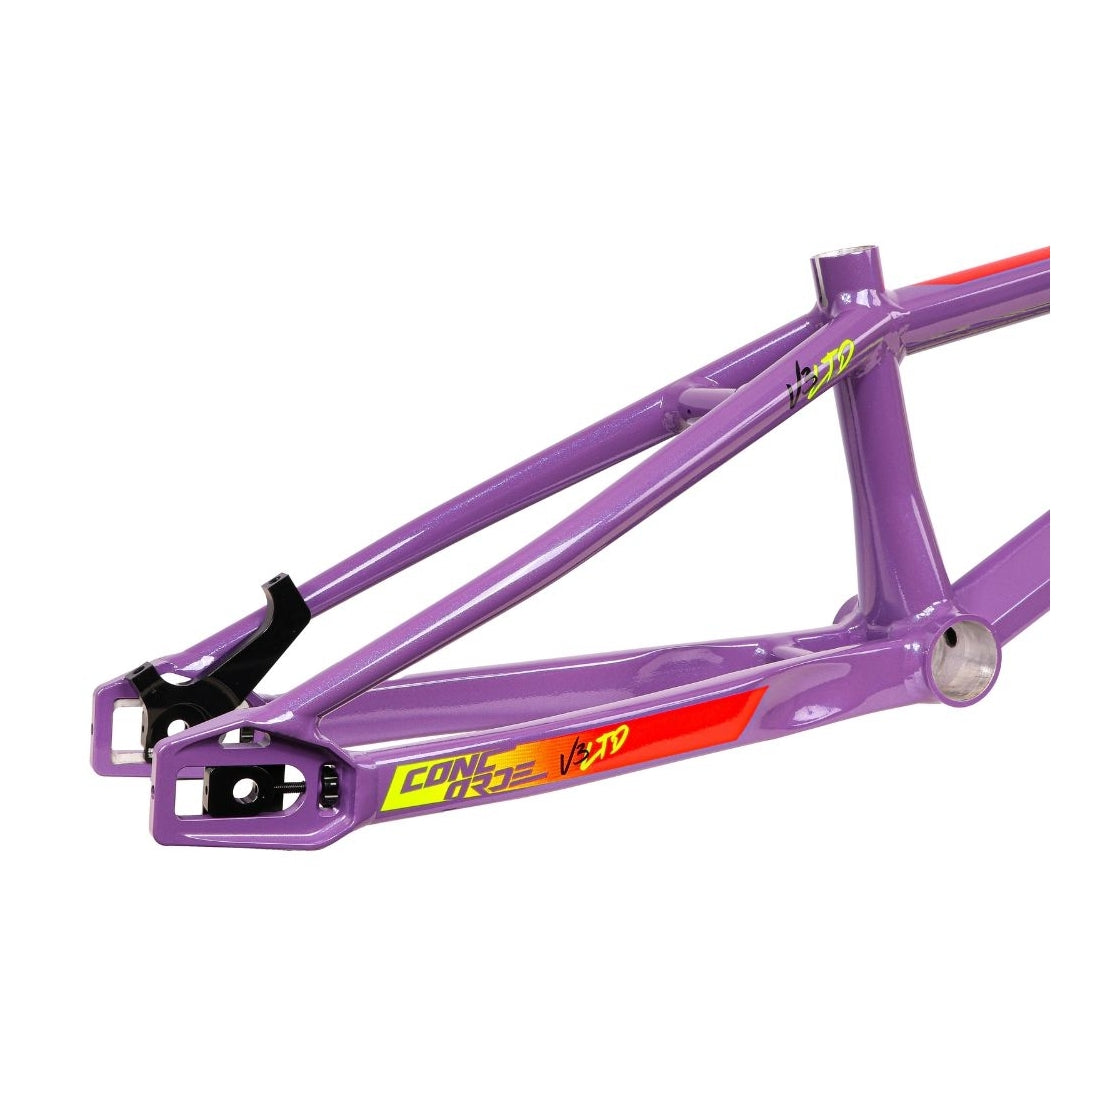 Aluminium Inspyre Concorde V3 Pro XL BMX Race bicycle frame with yellow and red decals.